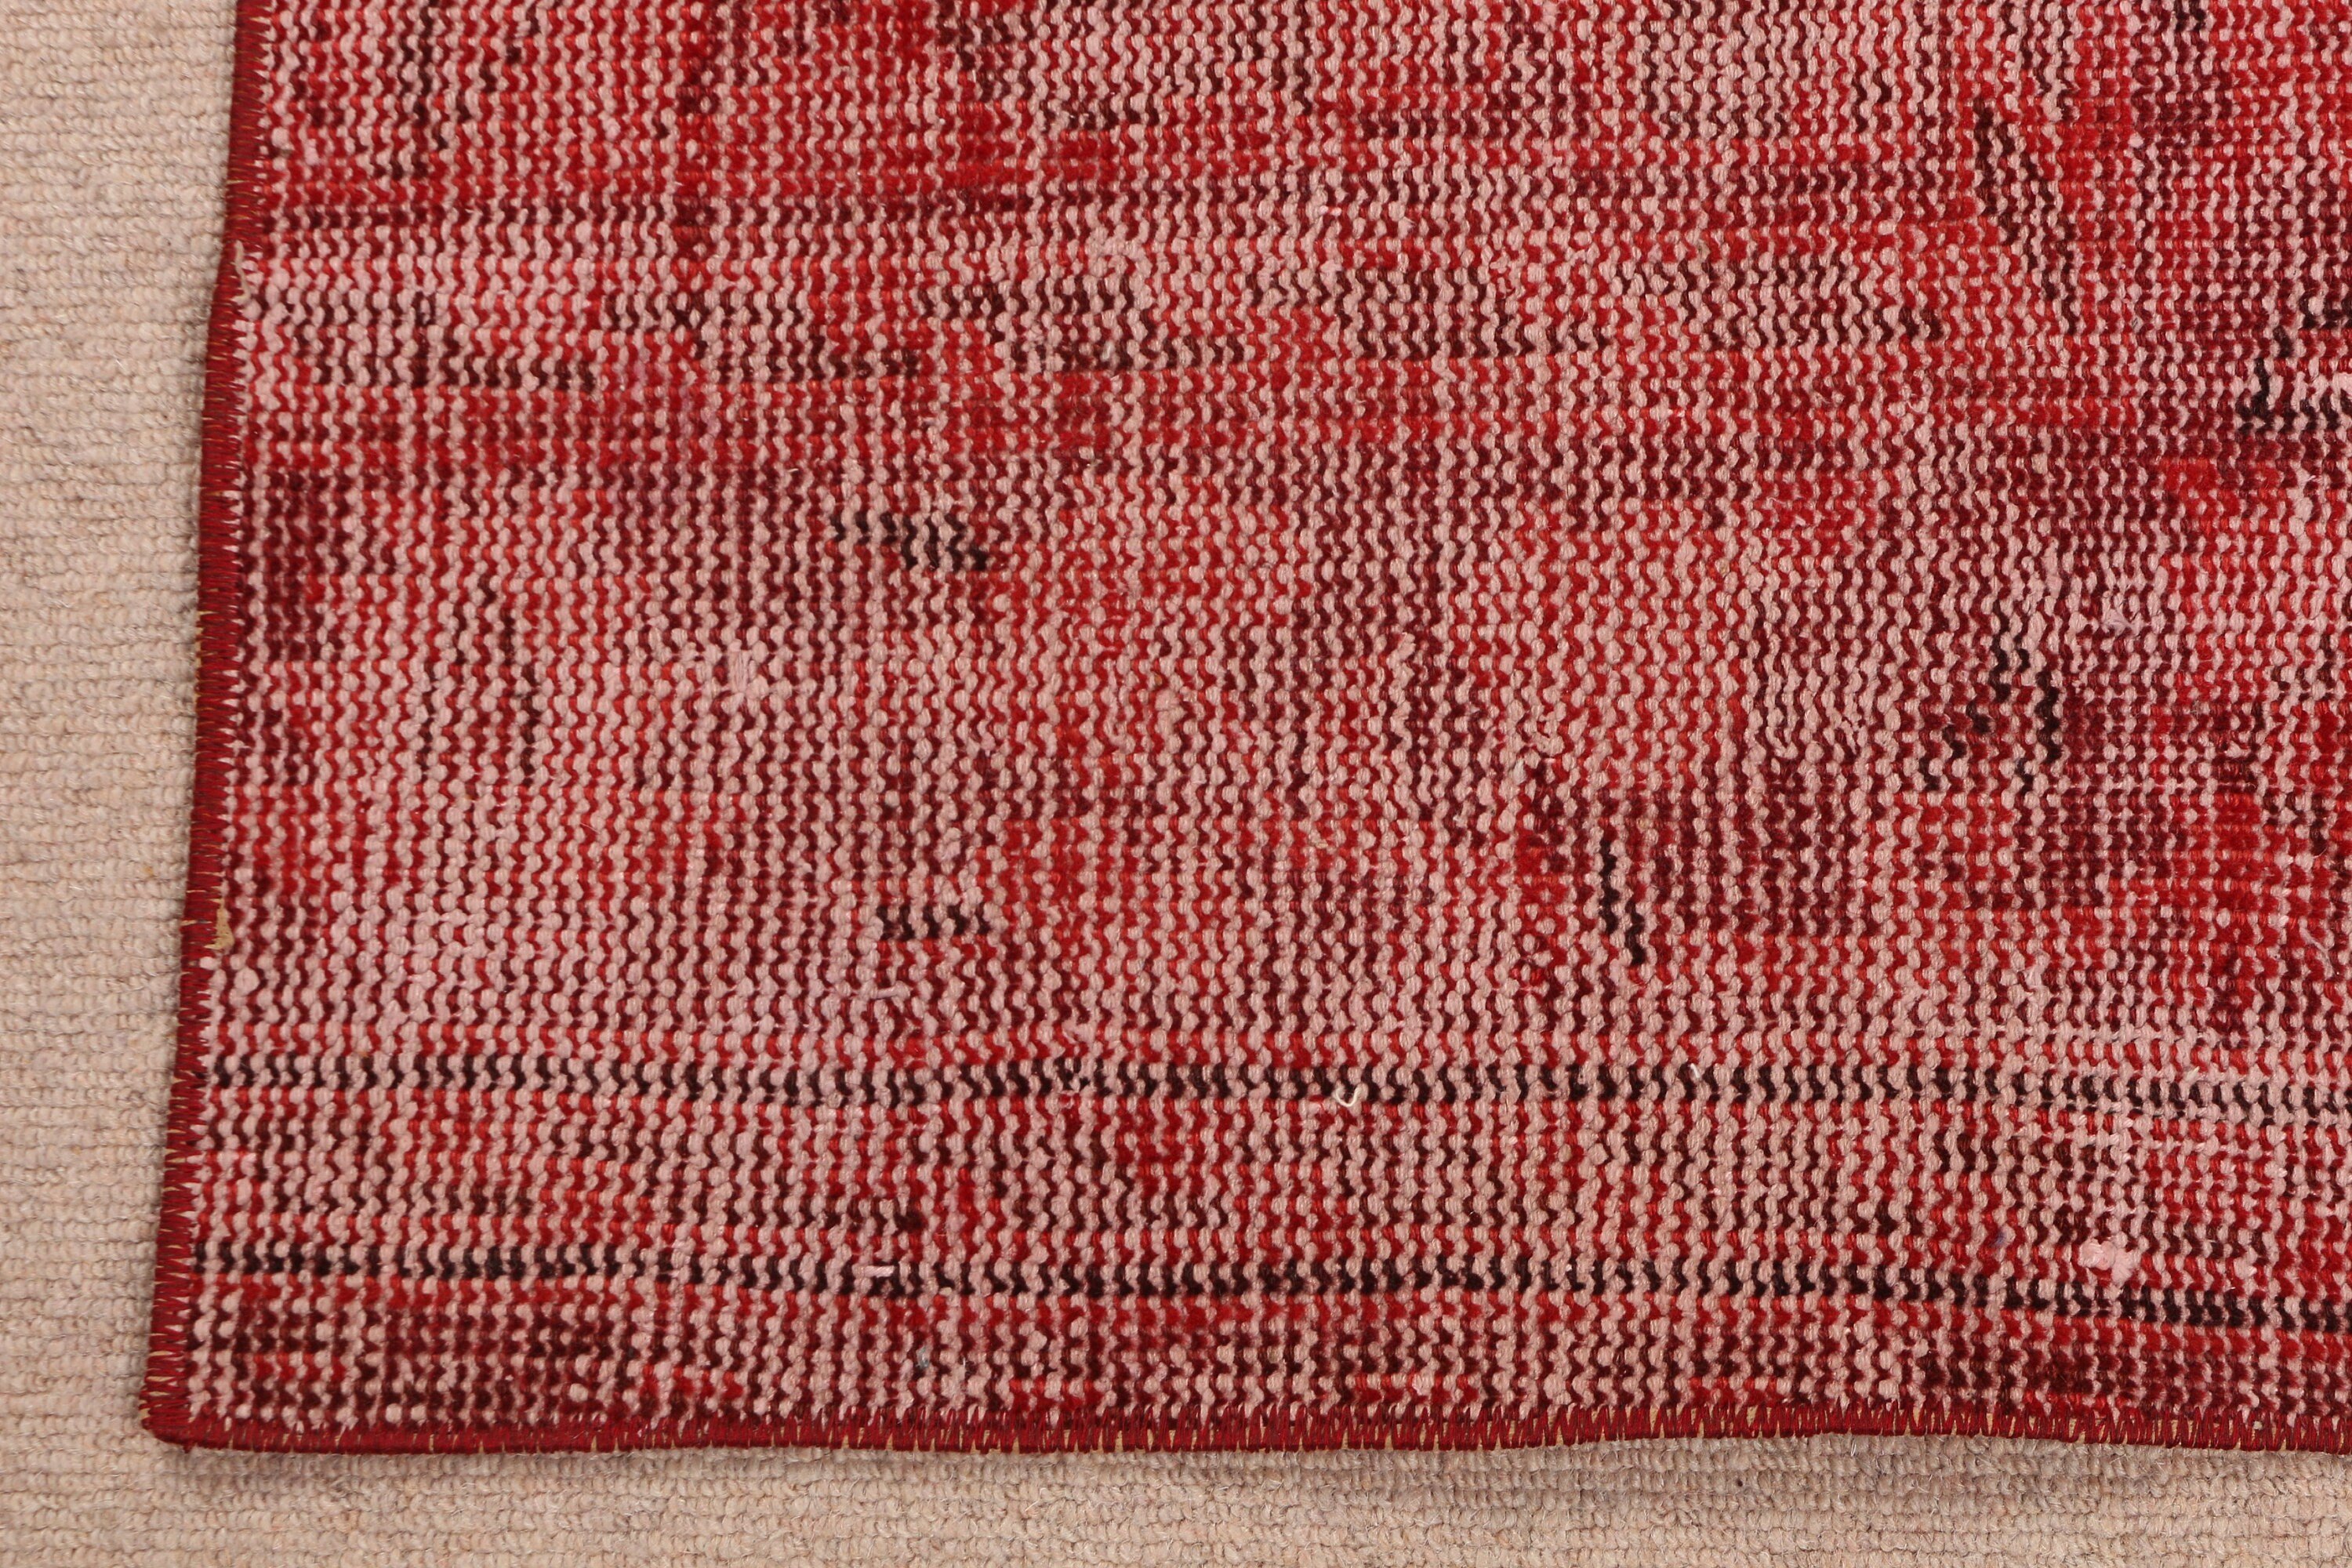 Vintage Rug, Bathroom Rugs, Oriental Rug, Rugs for Kitchen, Turkish Rug, Old Rug, Anatolian Rug, Red  1.9x3.8 ft Small Rugs